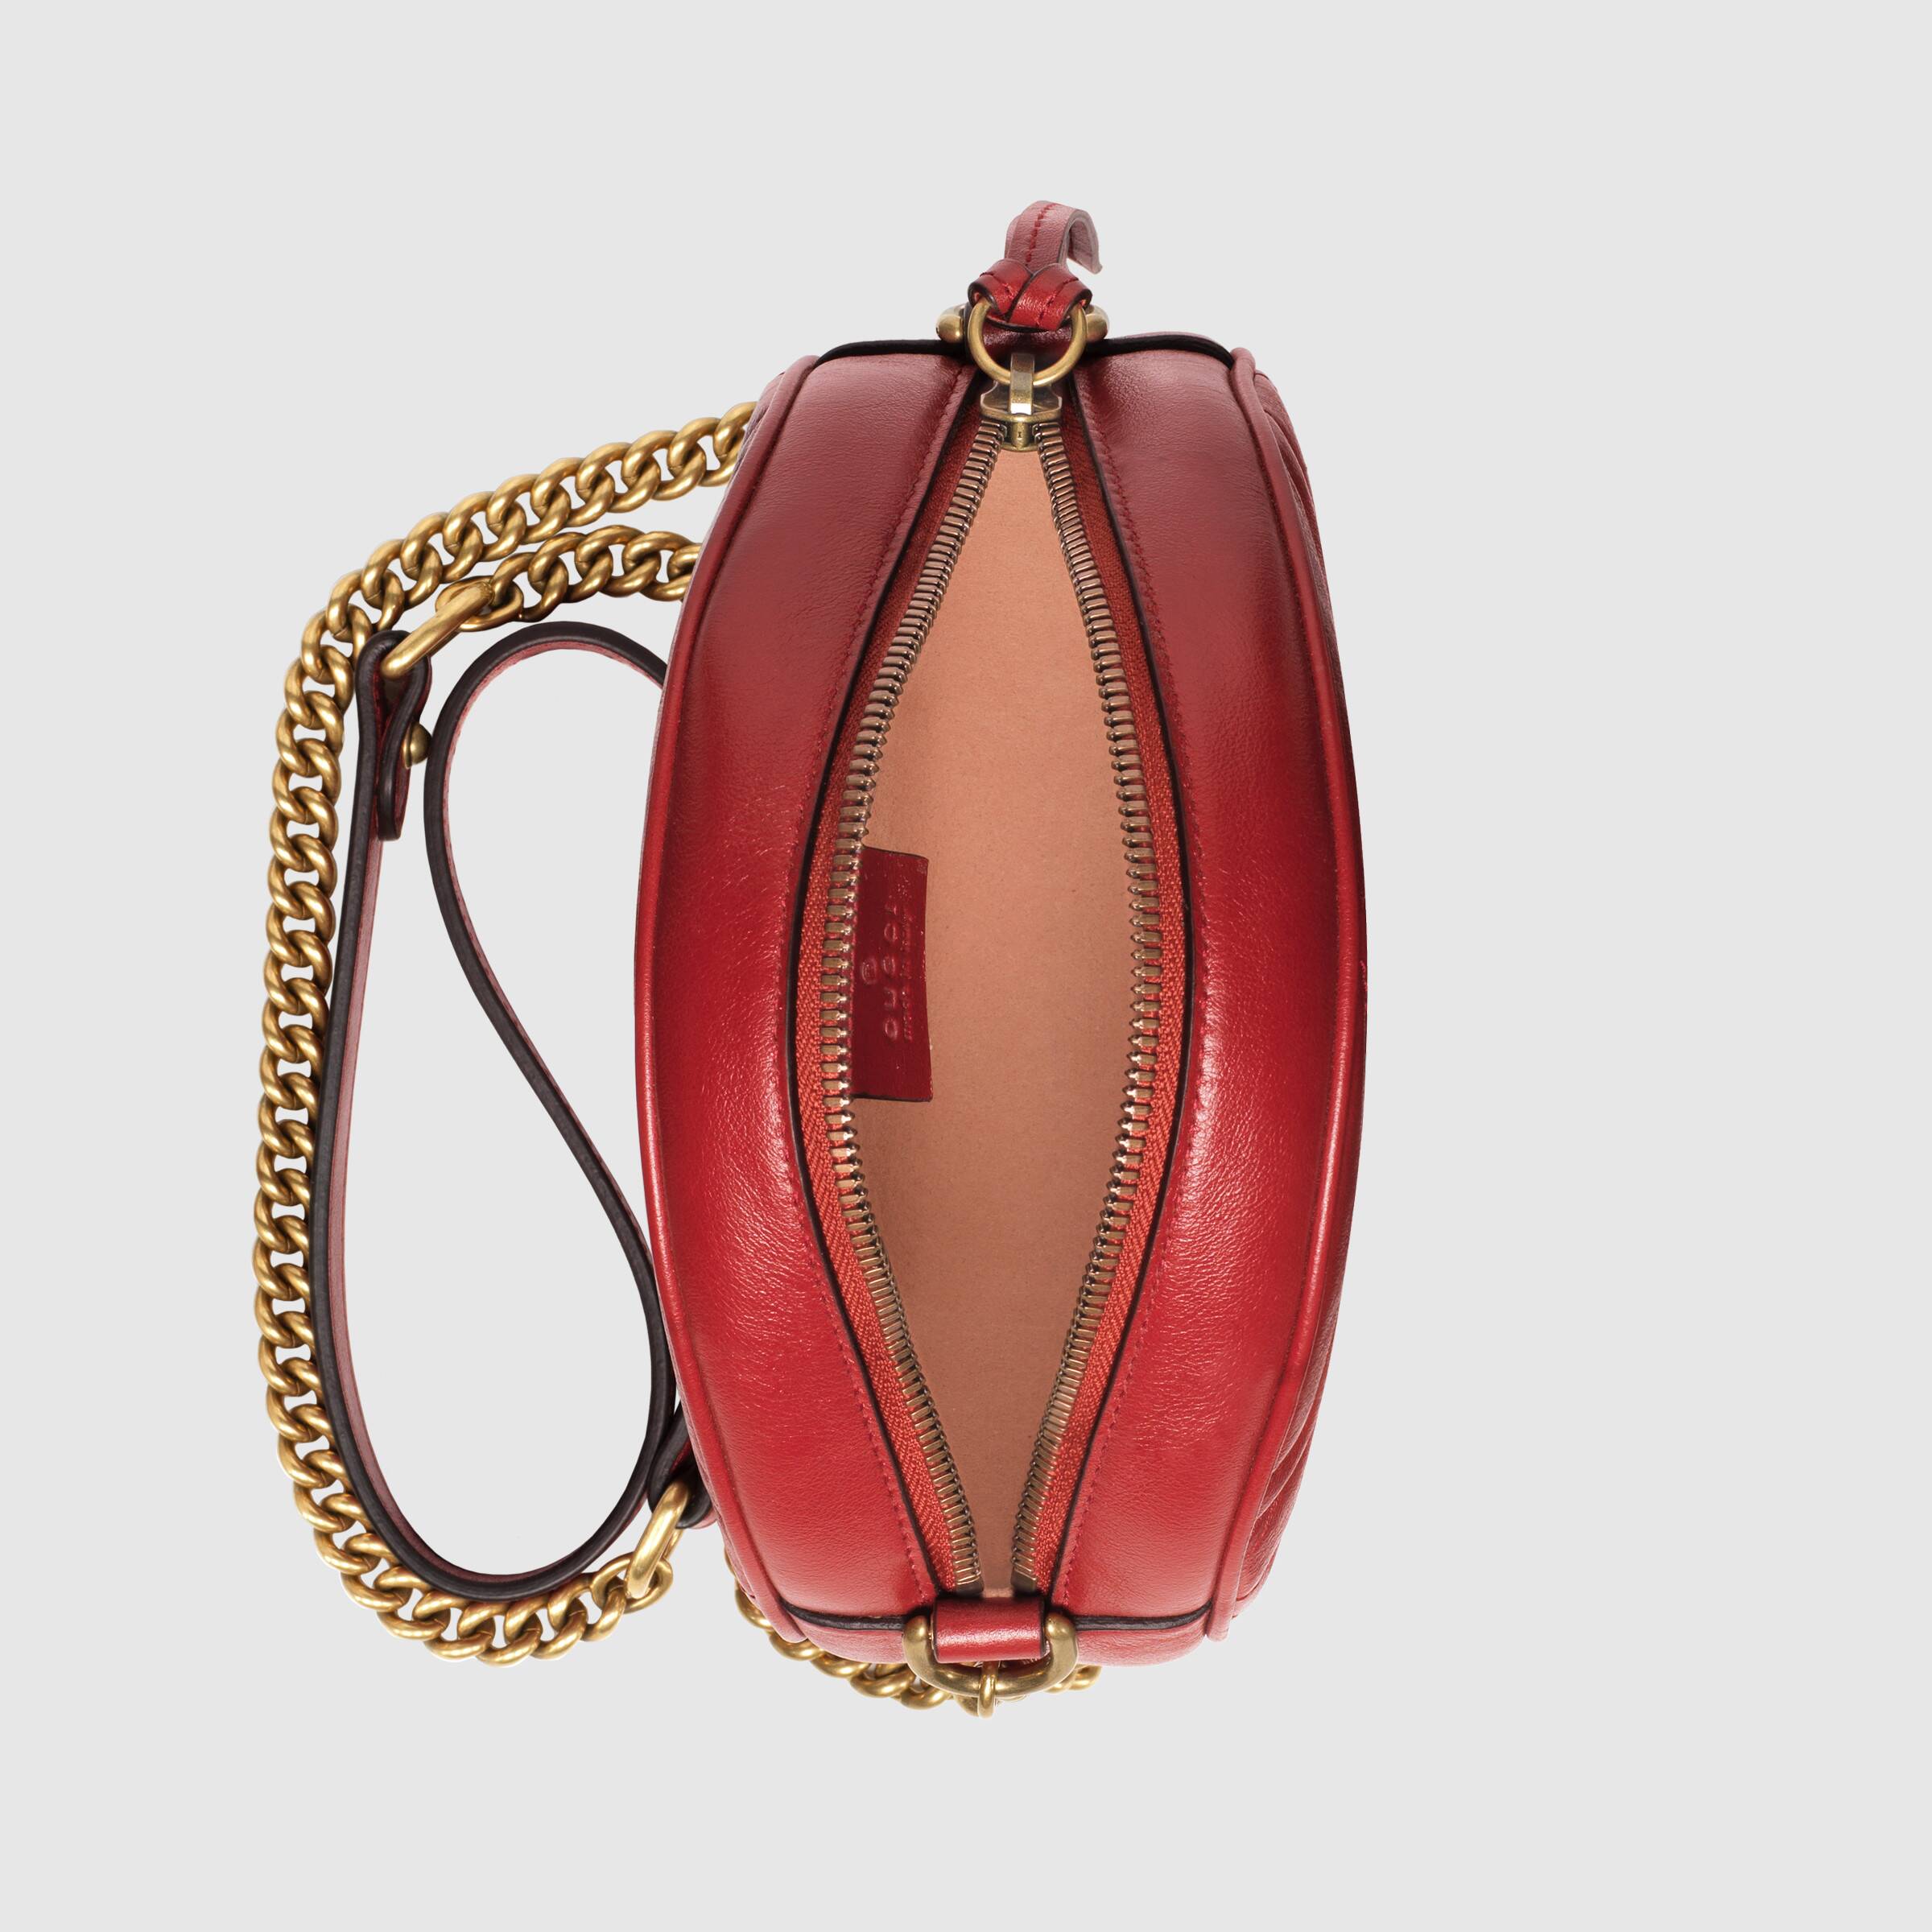 Gucci GG Marmont Mini Round Shoulder Bag Hibiscus Red